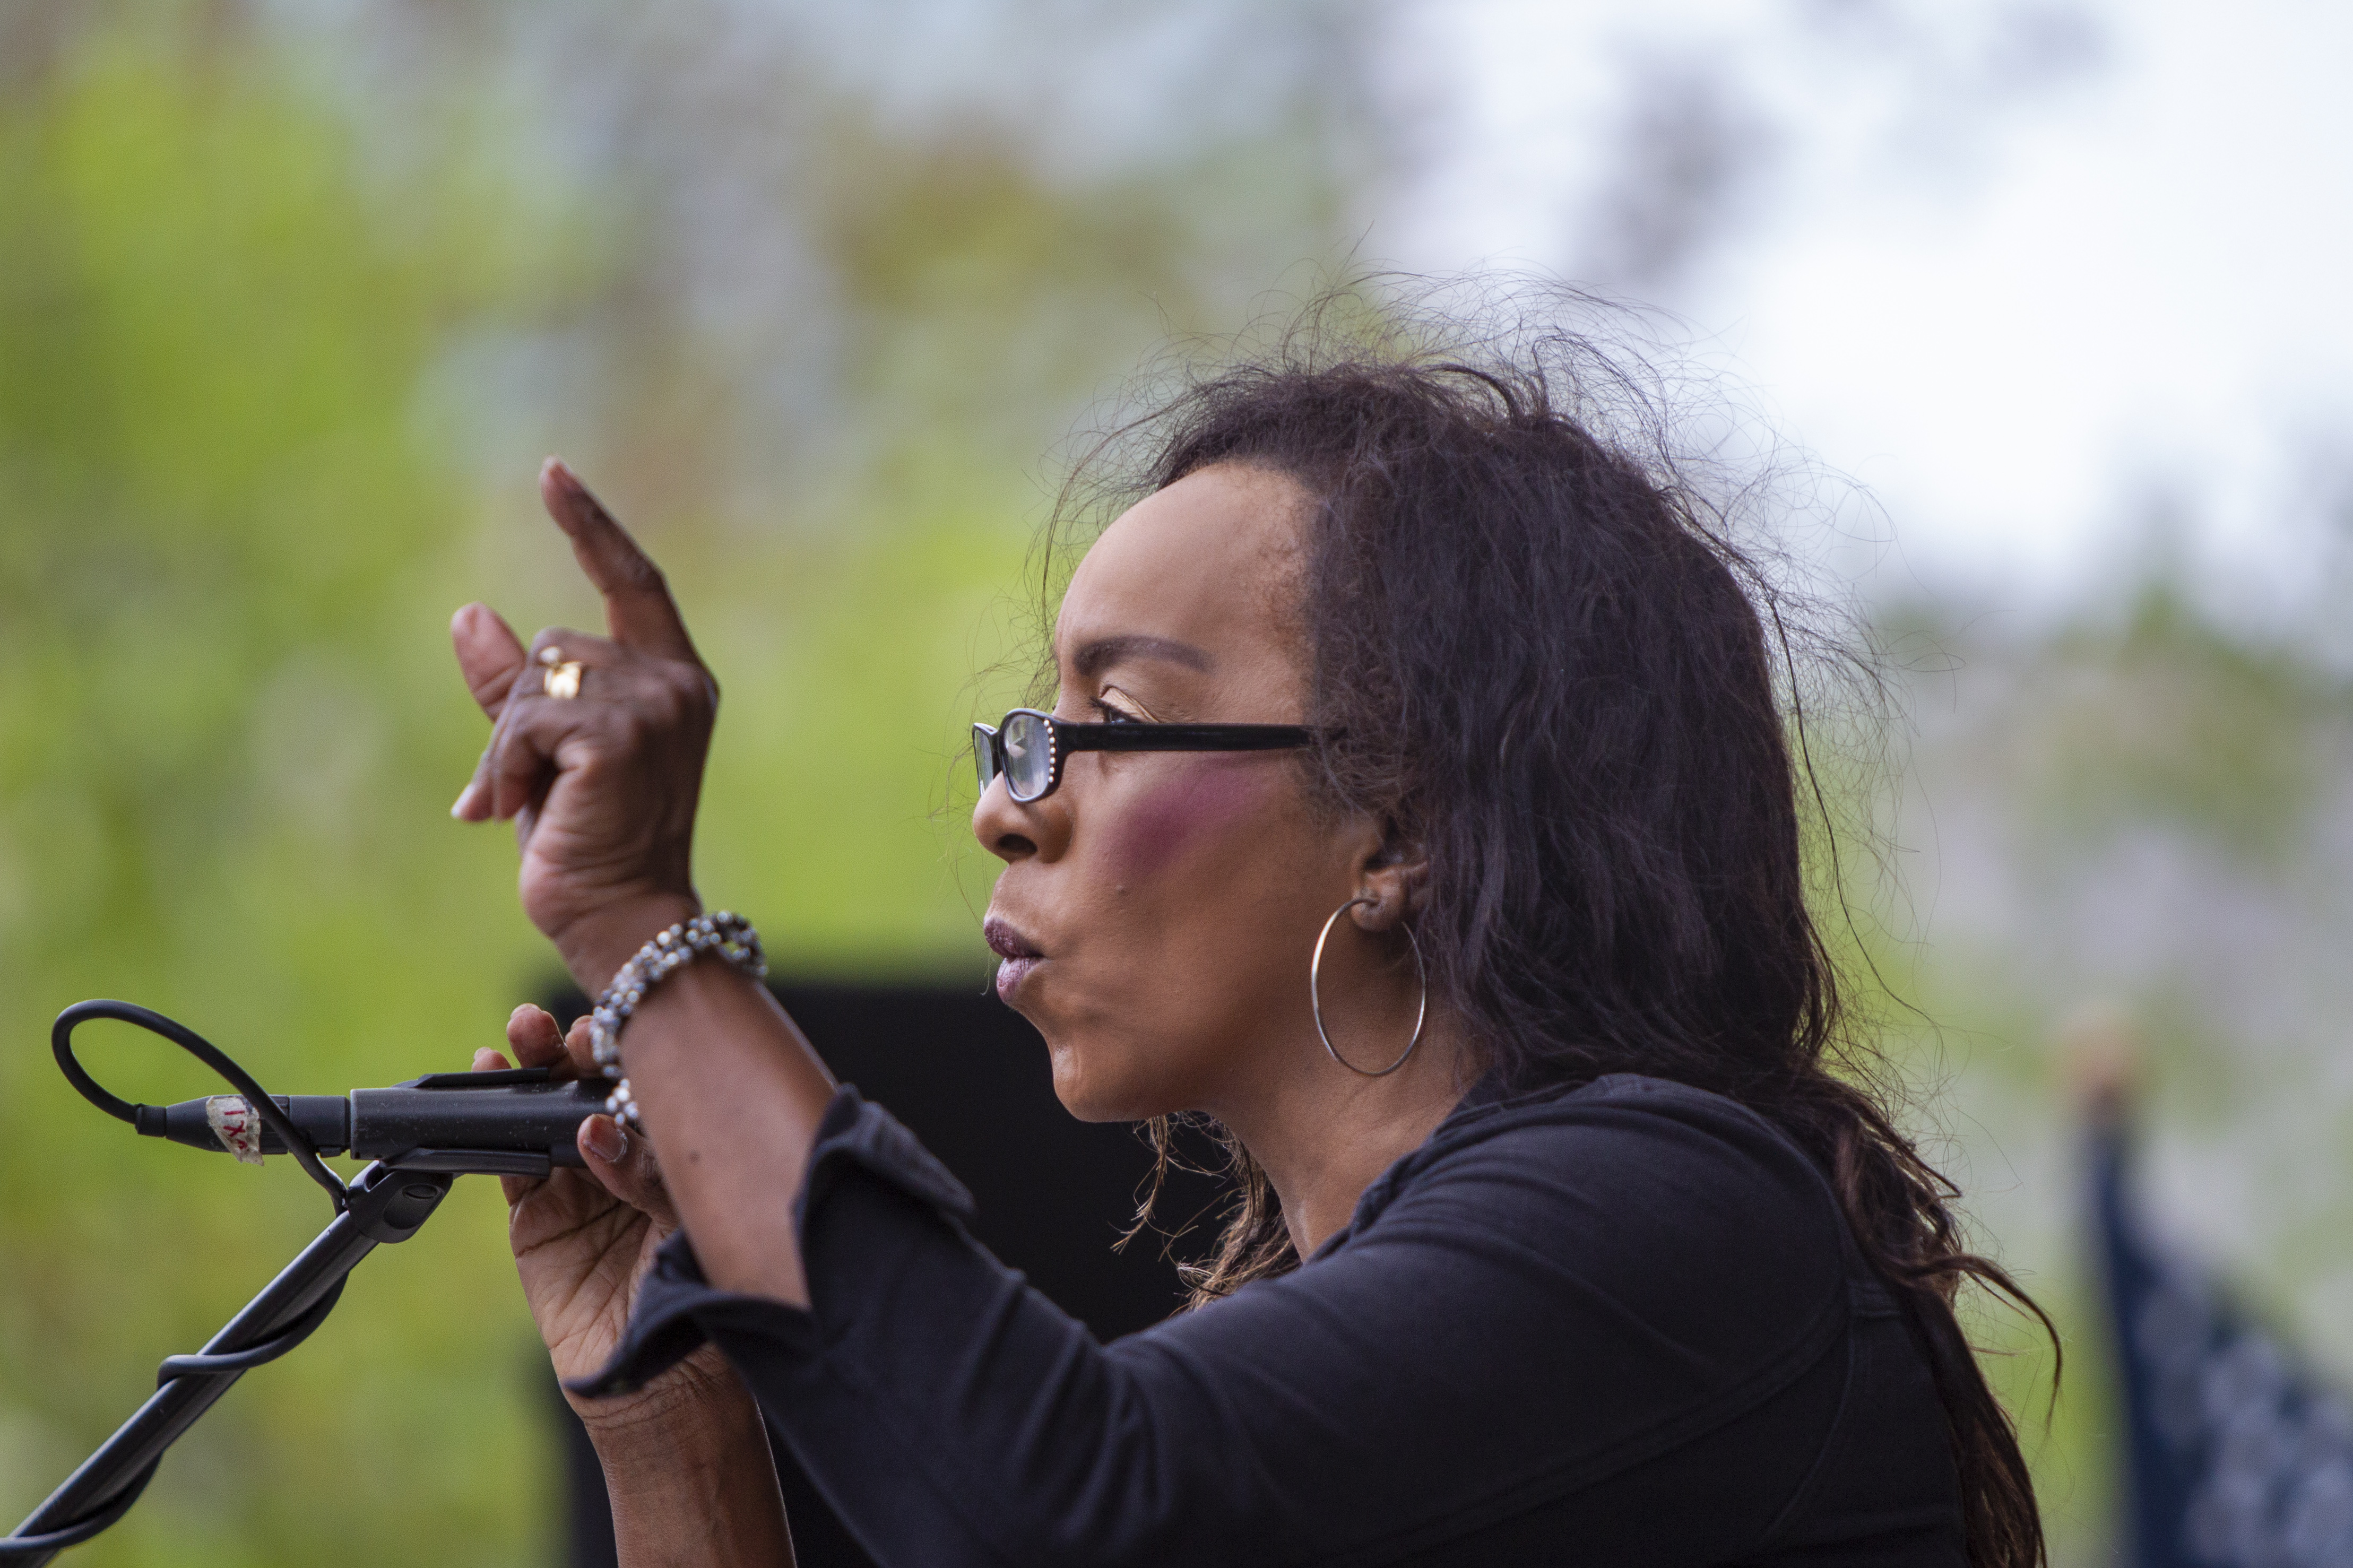 Pastor Bernadette Smith takes part in the "American Patriot Rally-Sheriffs speak out" event at Rosa Parks Circle in downtown Grand Rapids on Monday, May 18, 2020. The crowd is protesting against Gov. Gretchen Whitmer's stay-at-home order. (Cory Morse | MLive.com)